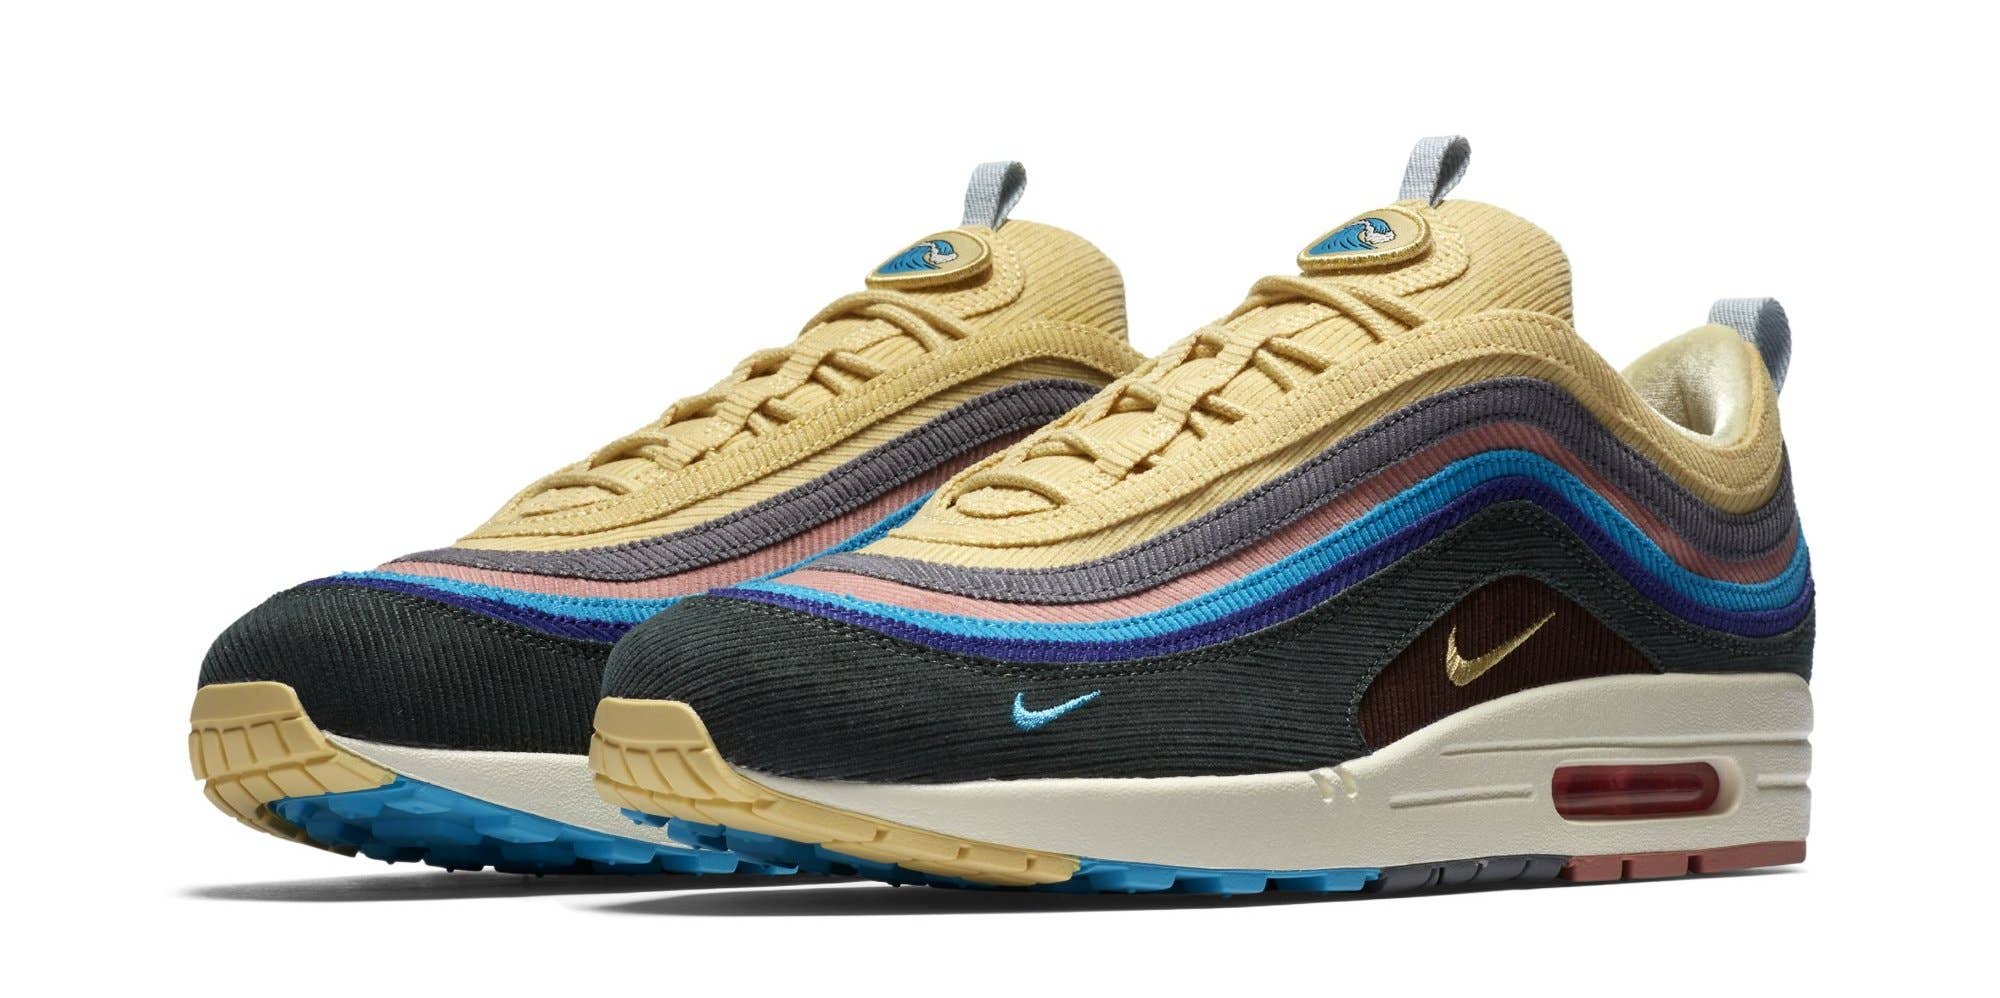 Sean Wotherspoon's Air Restocking Today | Complex